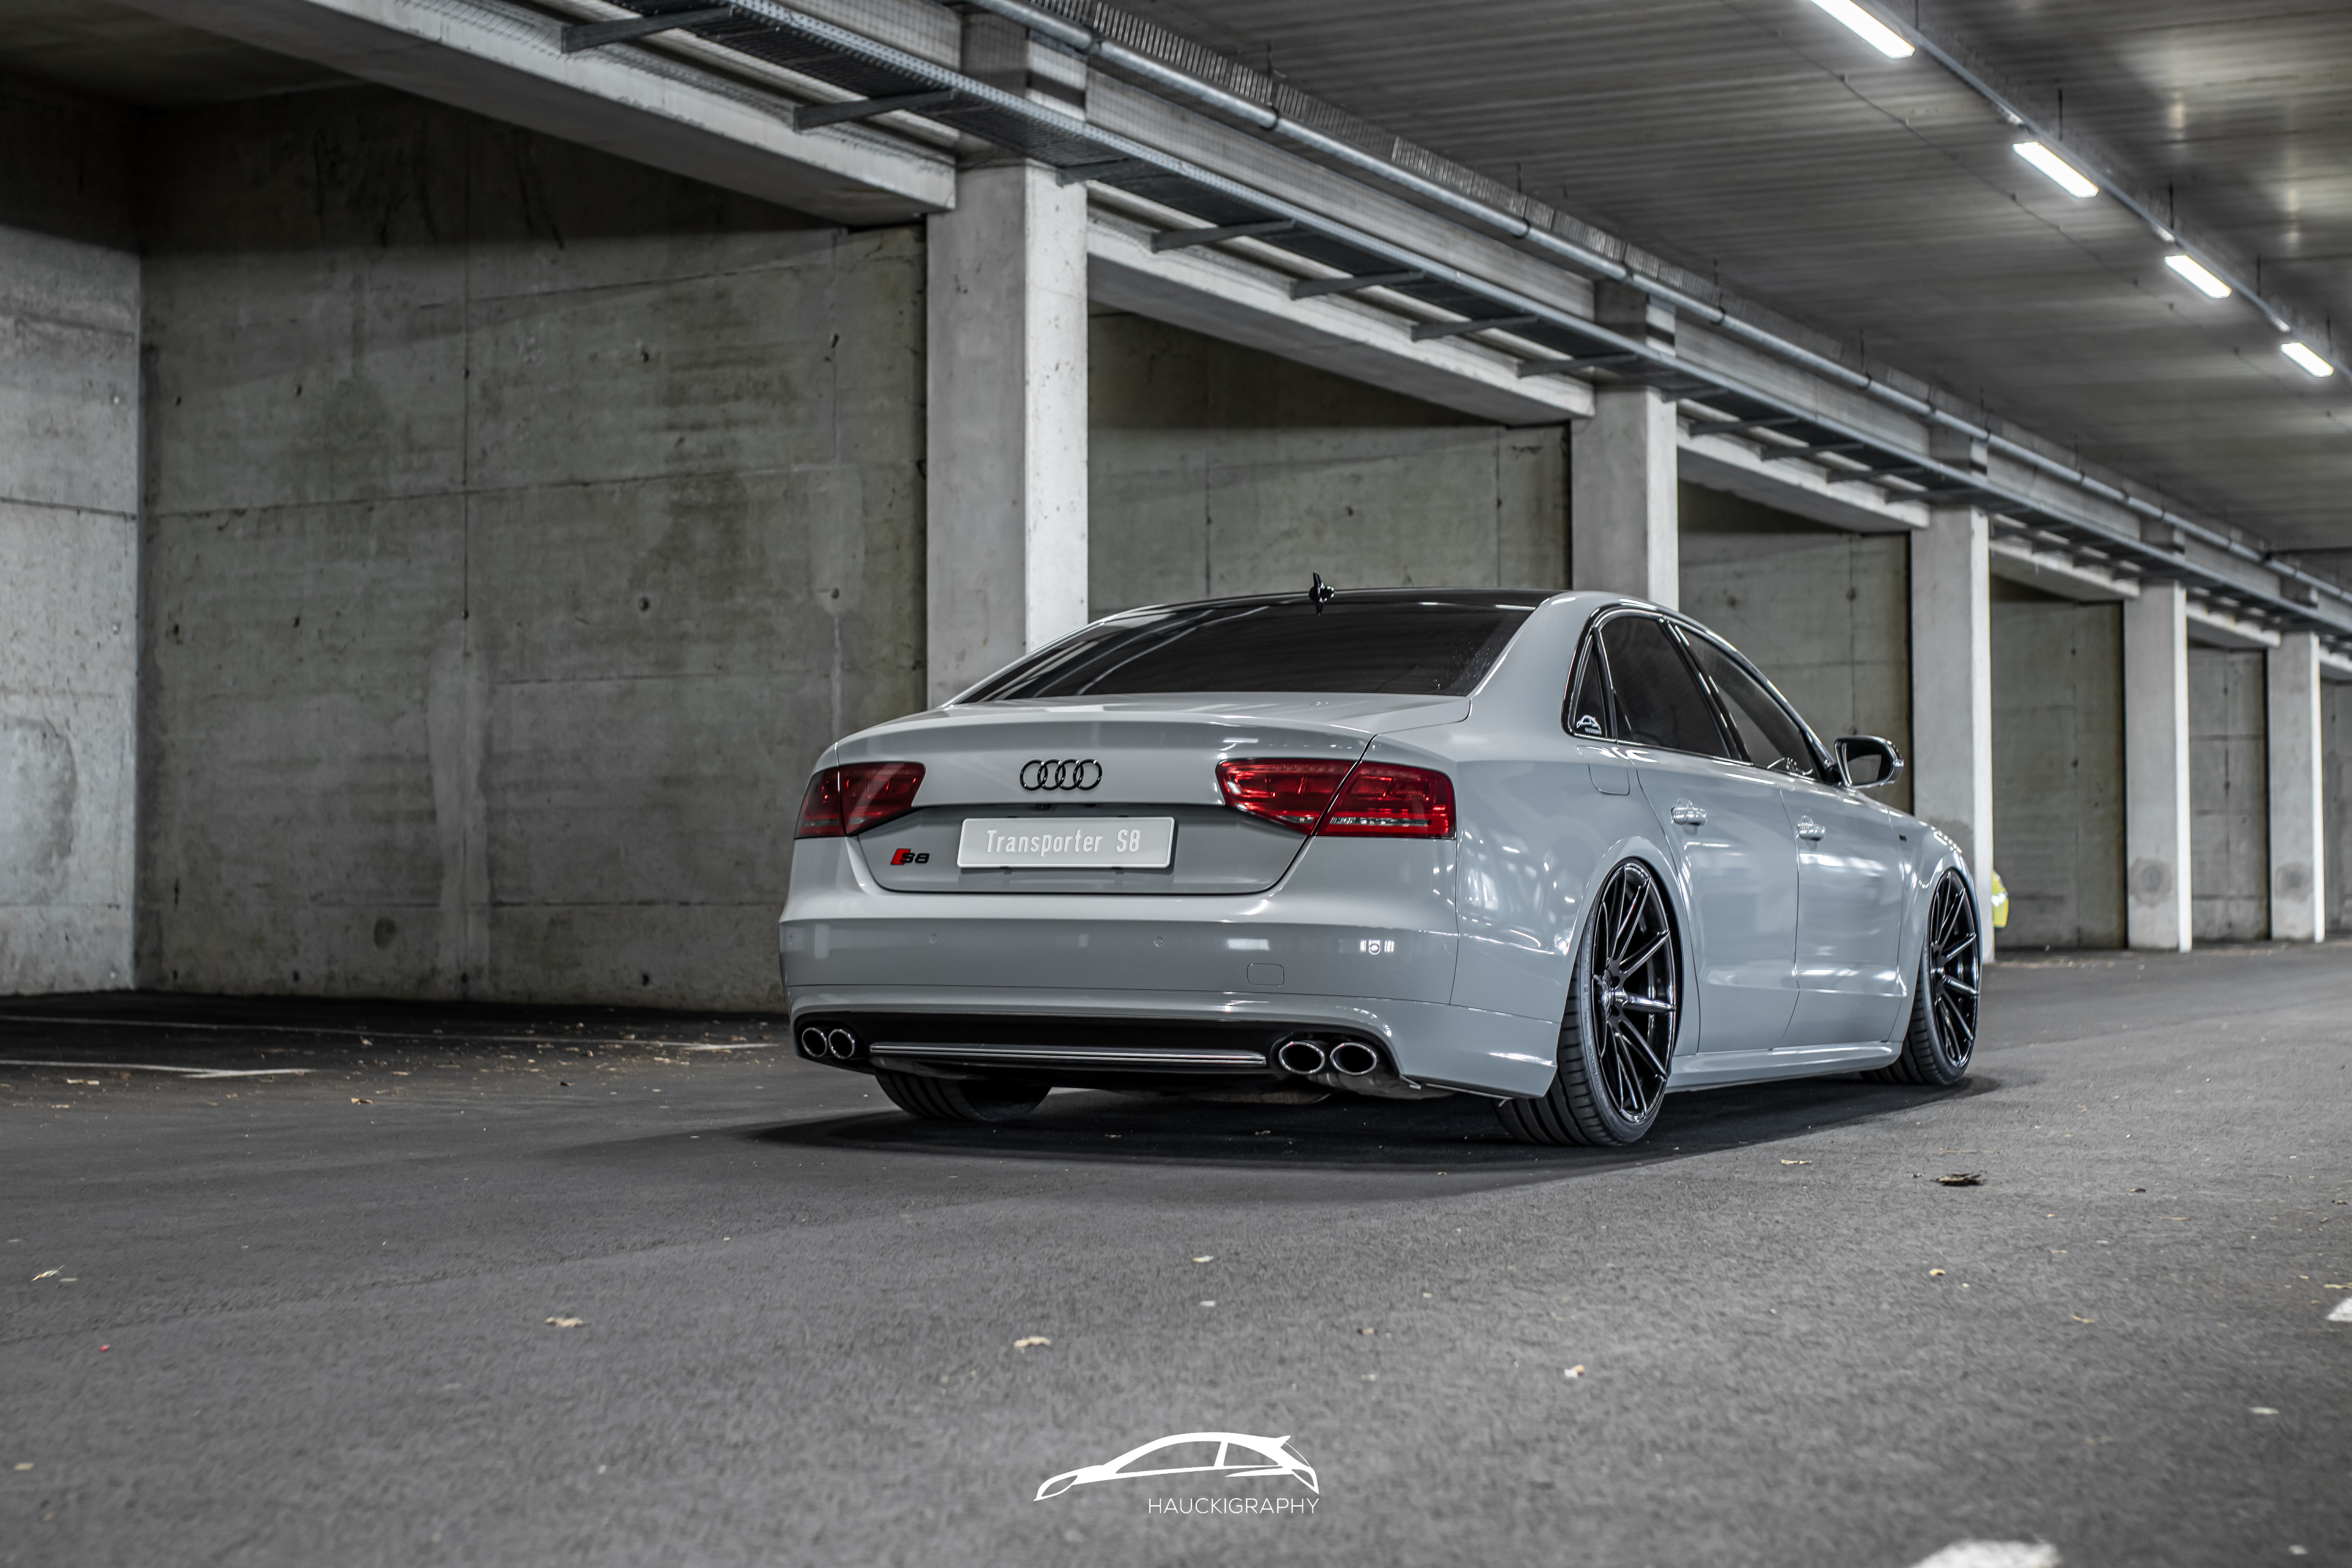 Audi A6 4G Tuning & Styling from JMS, JMS - Fahrzeugteile GmbH, Story -  PresseBox